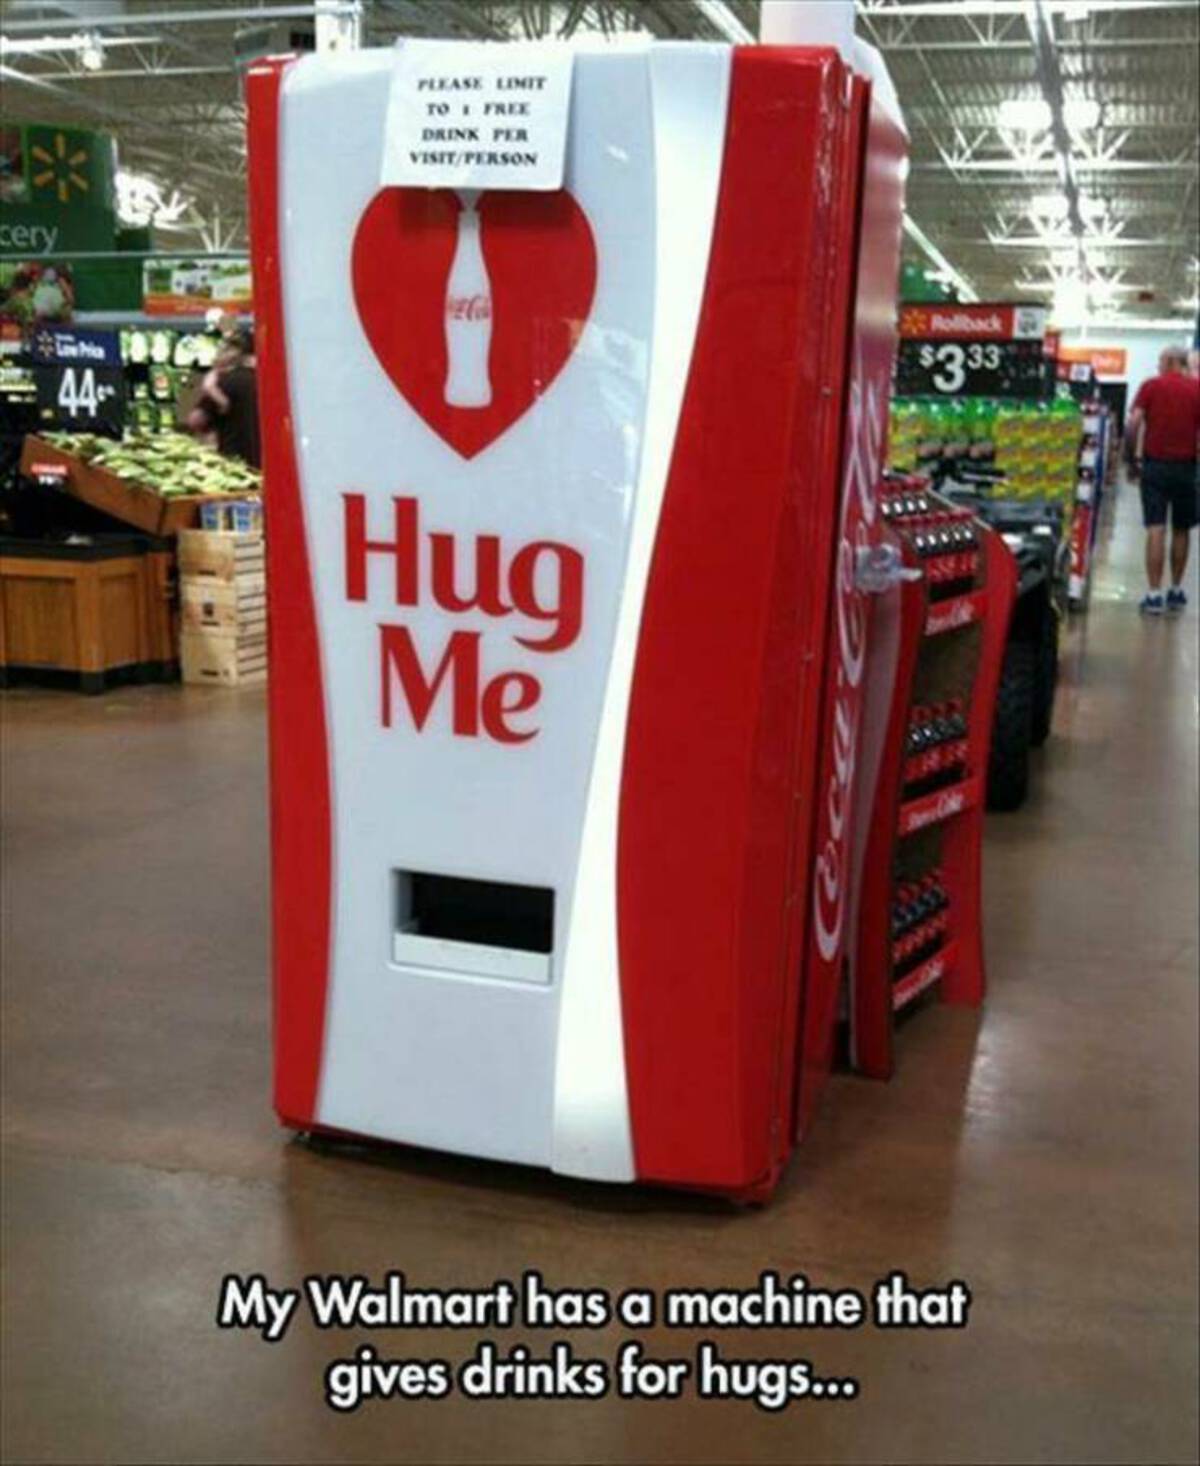 banner - cery Please Limit To Free Drink Per VisitPerson 44 Hug Me Rollback $333 My Walmart has a machine that gives drinks for hugs...